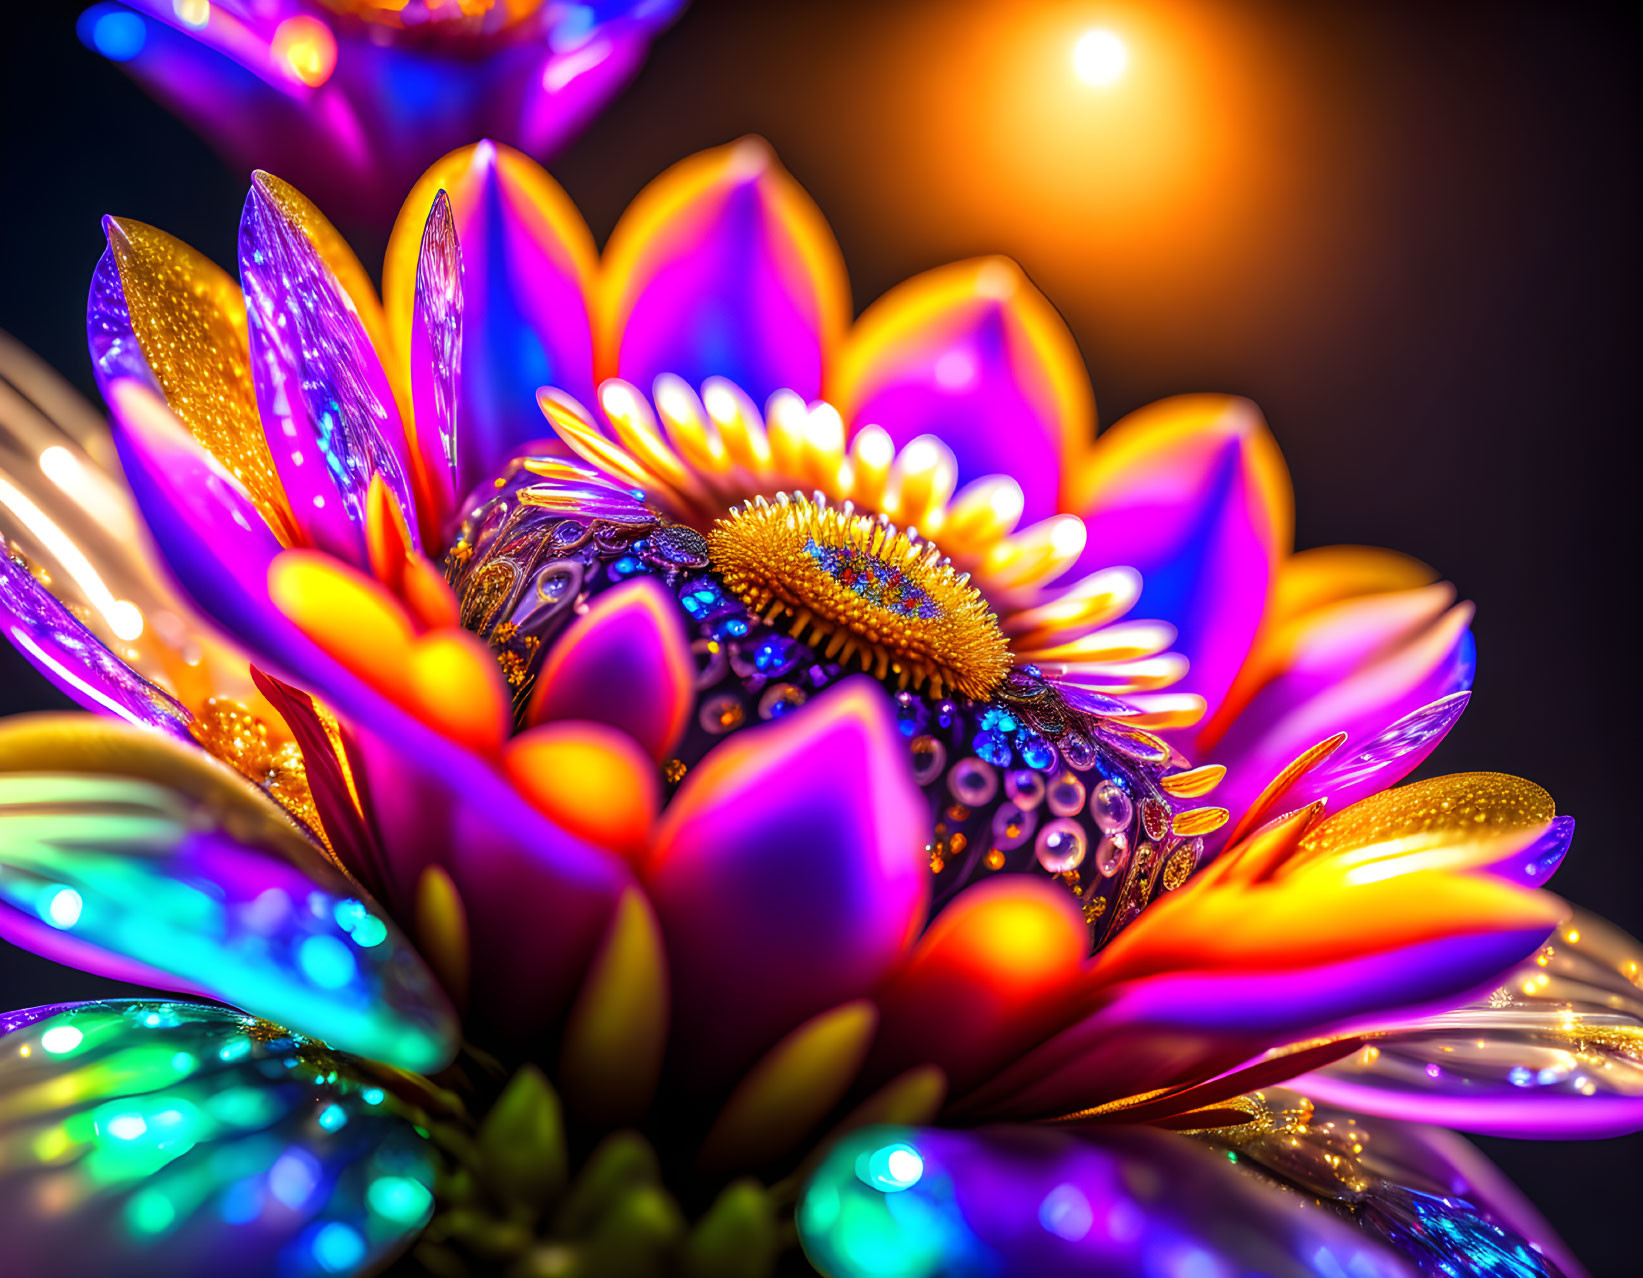 Neon-colored digital art flower with glowing petals and intricate patterns